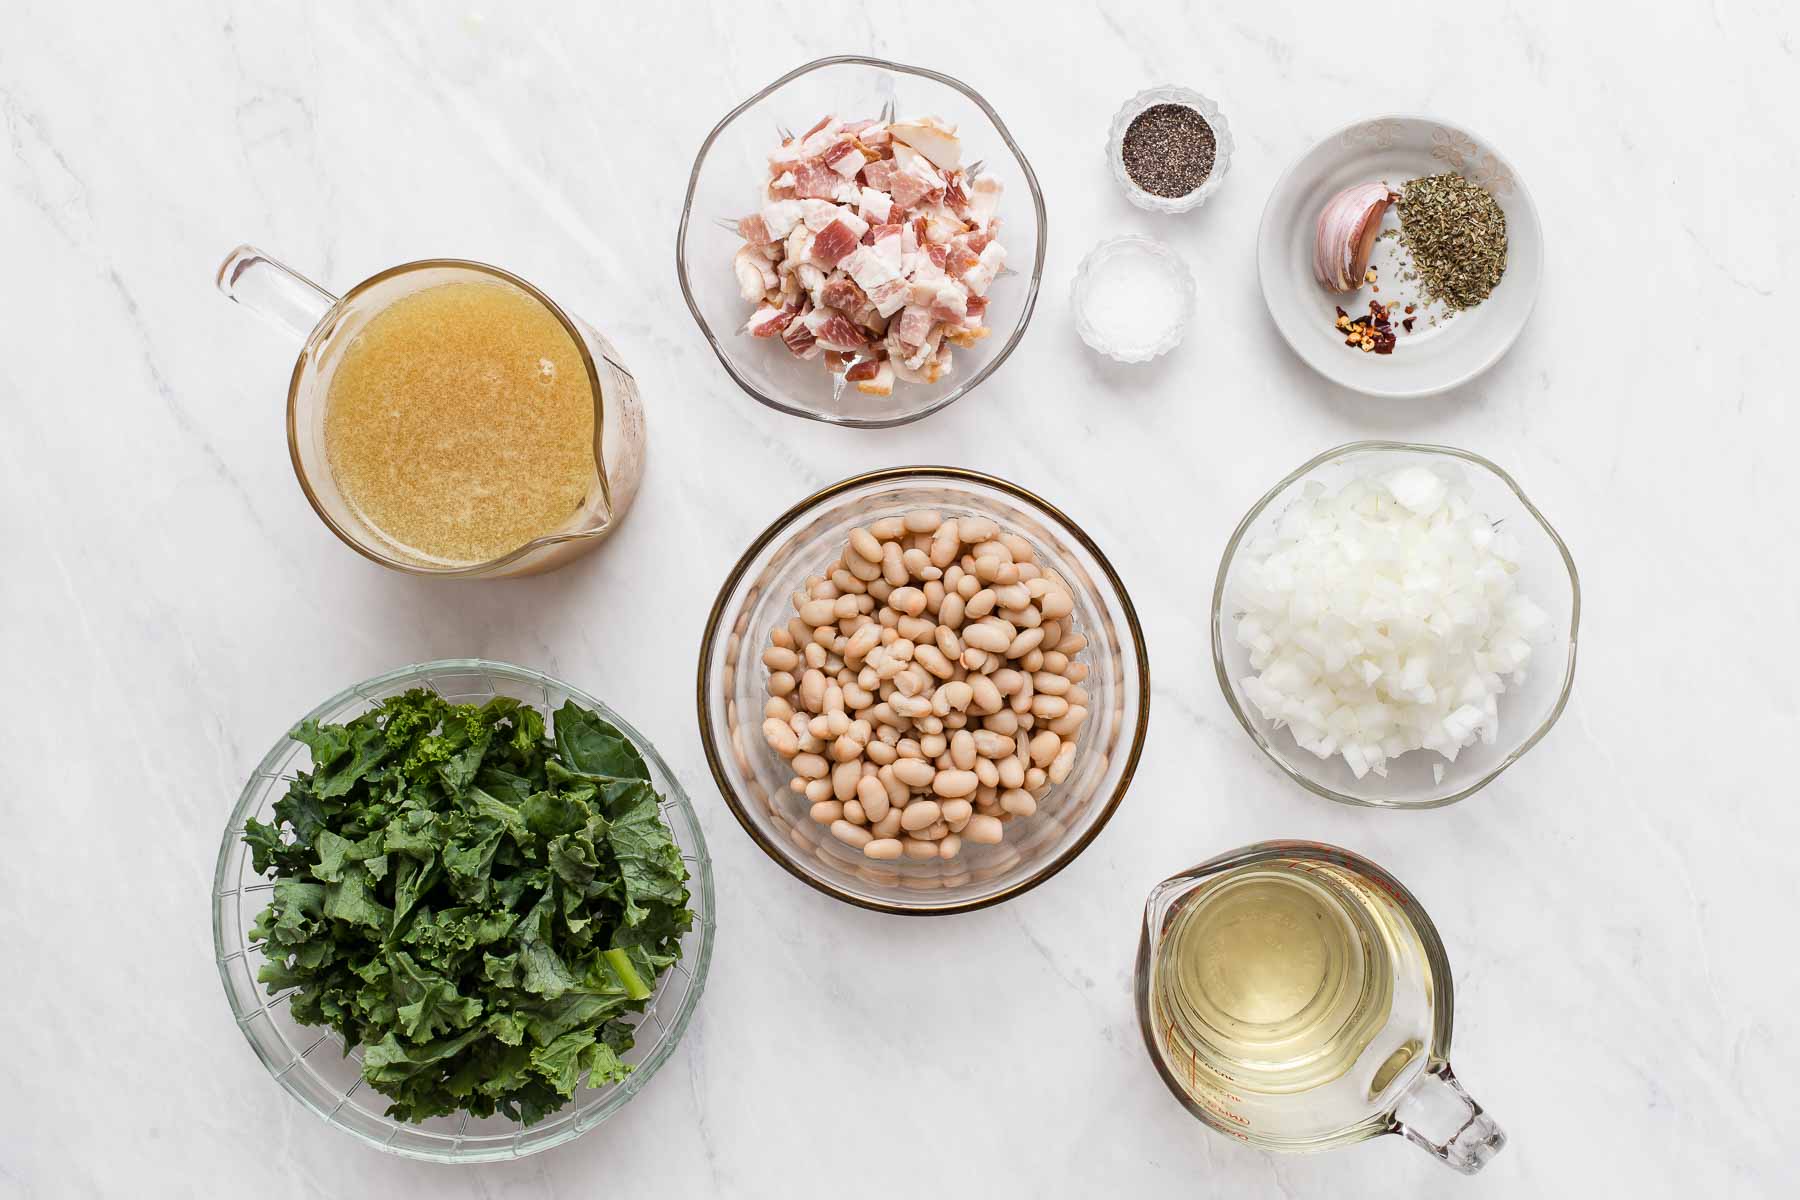 White beans, kale, chicken broth, and diced bacon in small bowls on white counter.